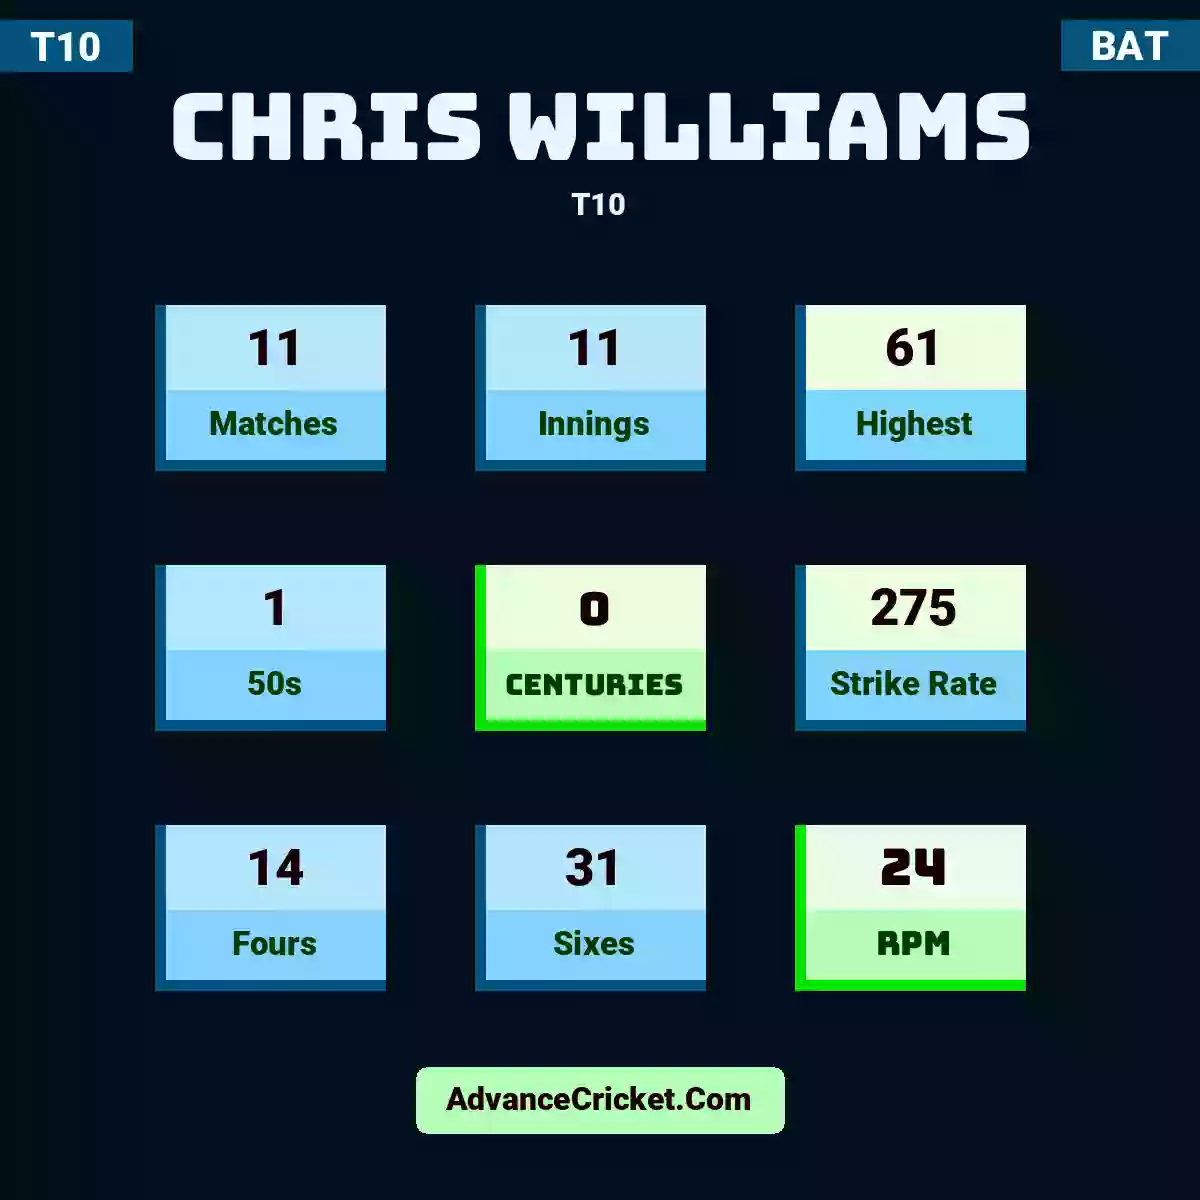 Chris Williams T10 , Chris Williams played 11 matches, scored 61 runs as highest, 1 half-centuries, and 0 centuries, with a strike rate of 275. C.Williams hit 14 fours and 31 sixes, with an RPM of 24.